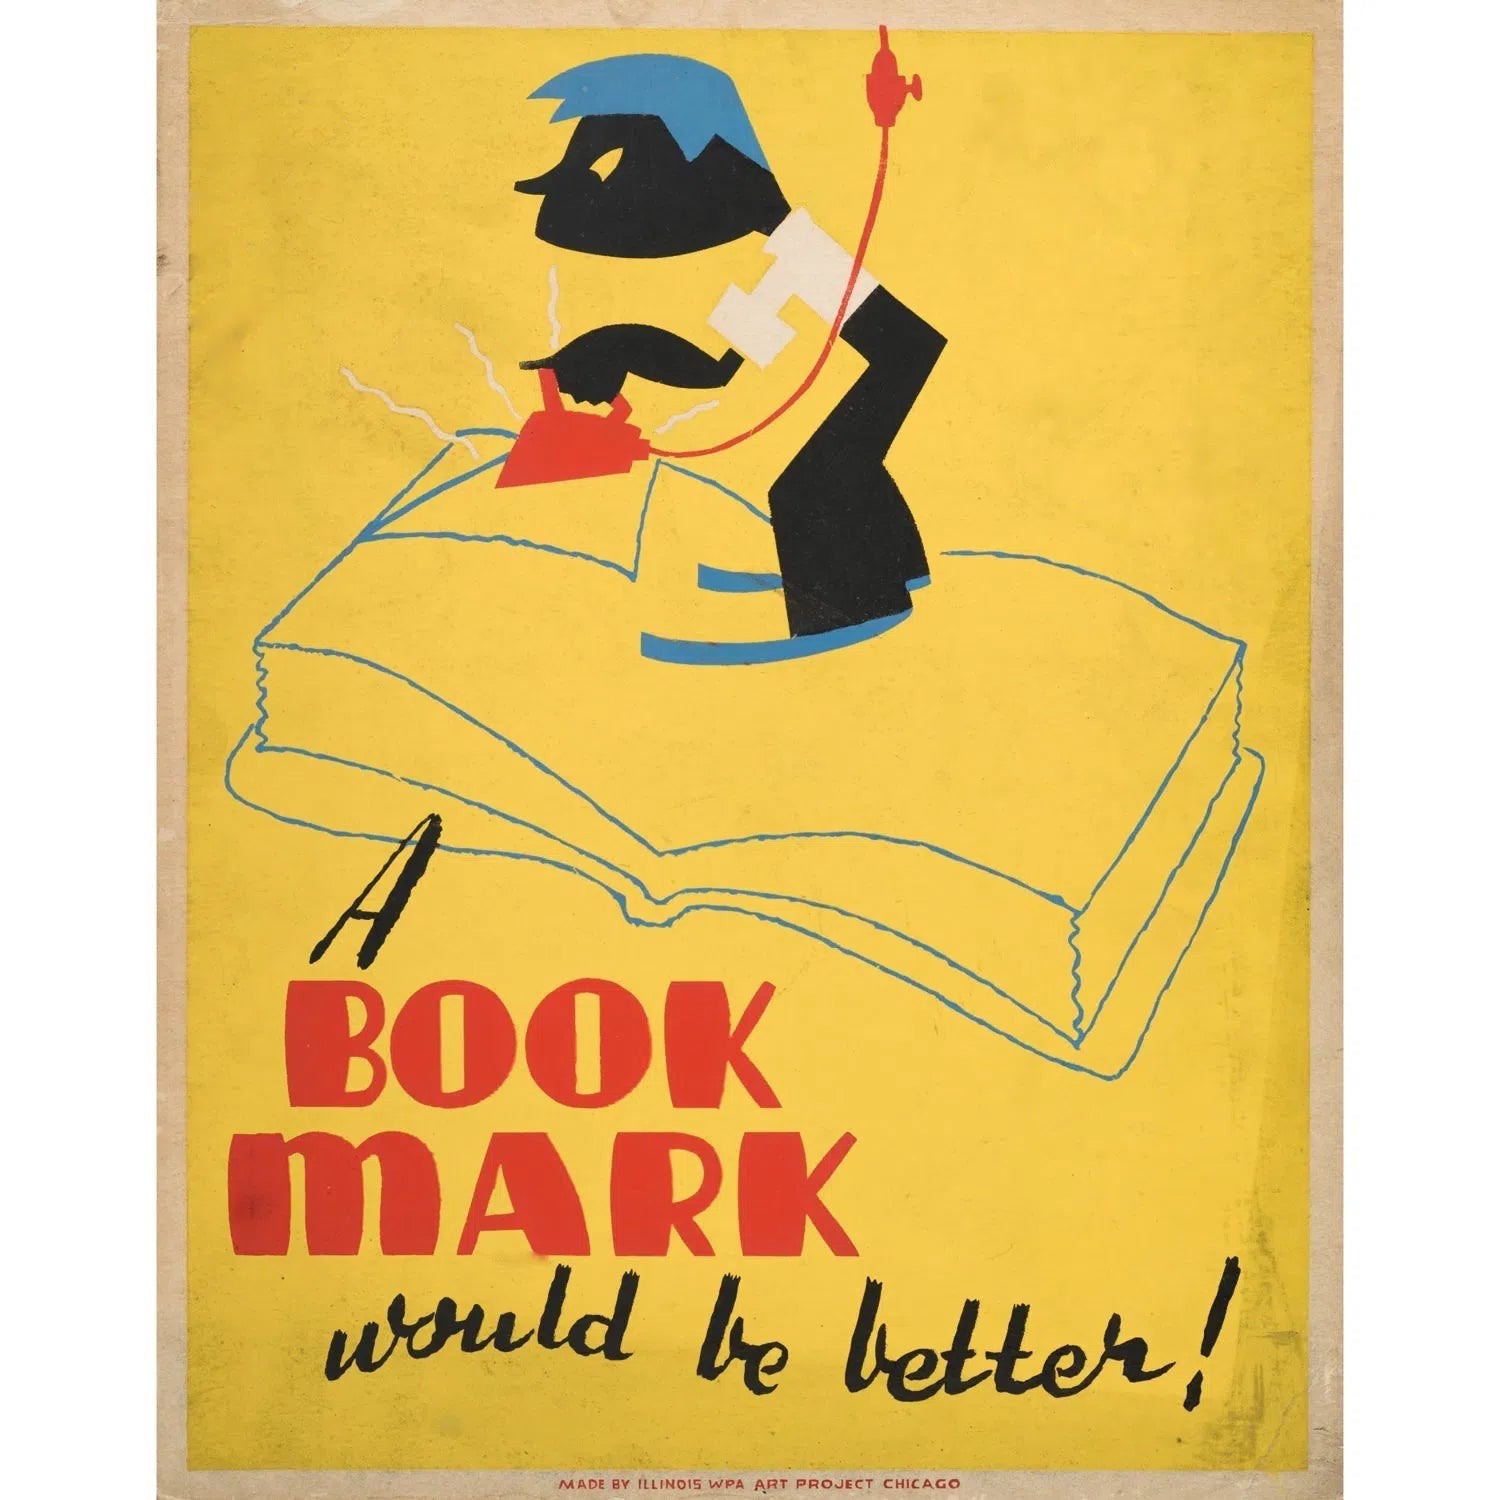 A book mark would be better-Imagesdartistes